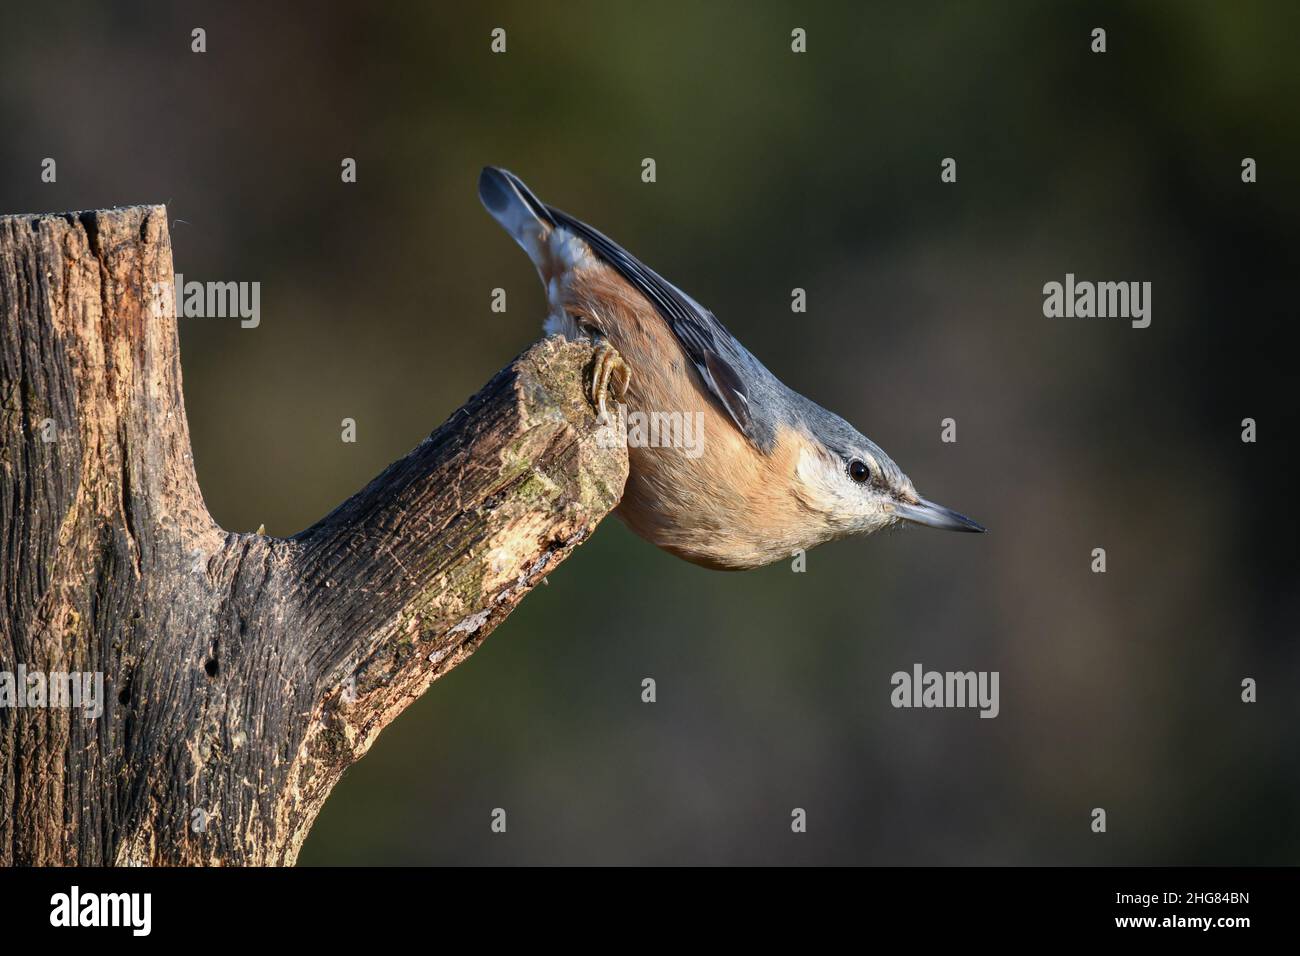 A close up of a nuthatch Sitta europaea as it perches on a tree stump Stock Photo